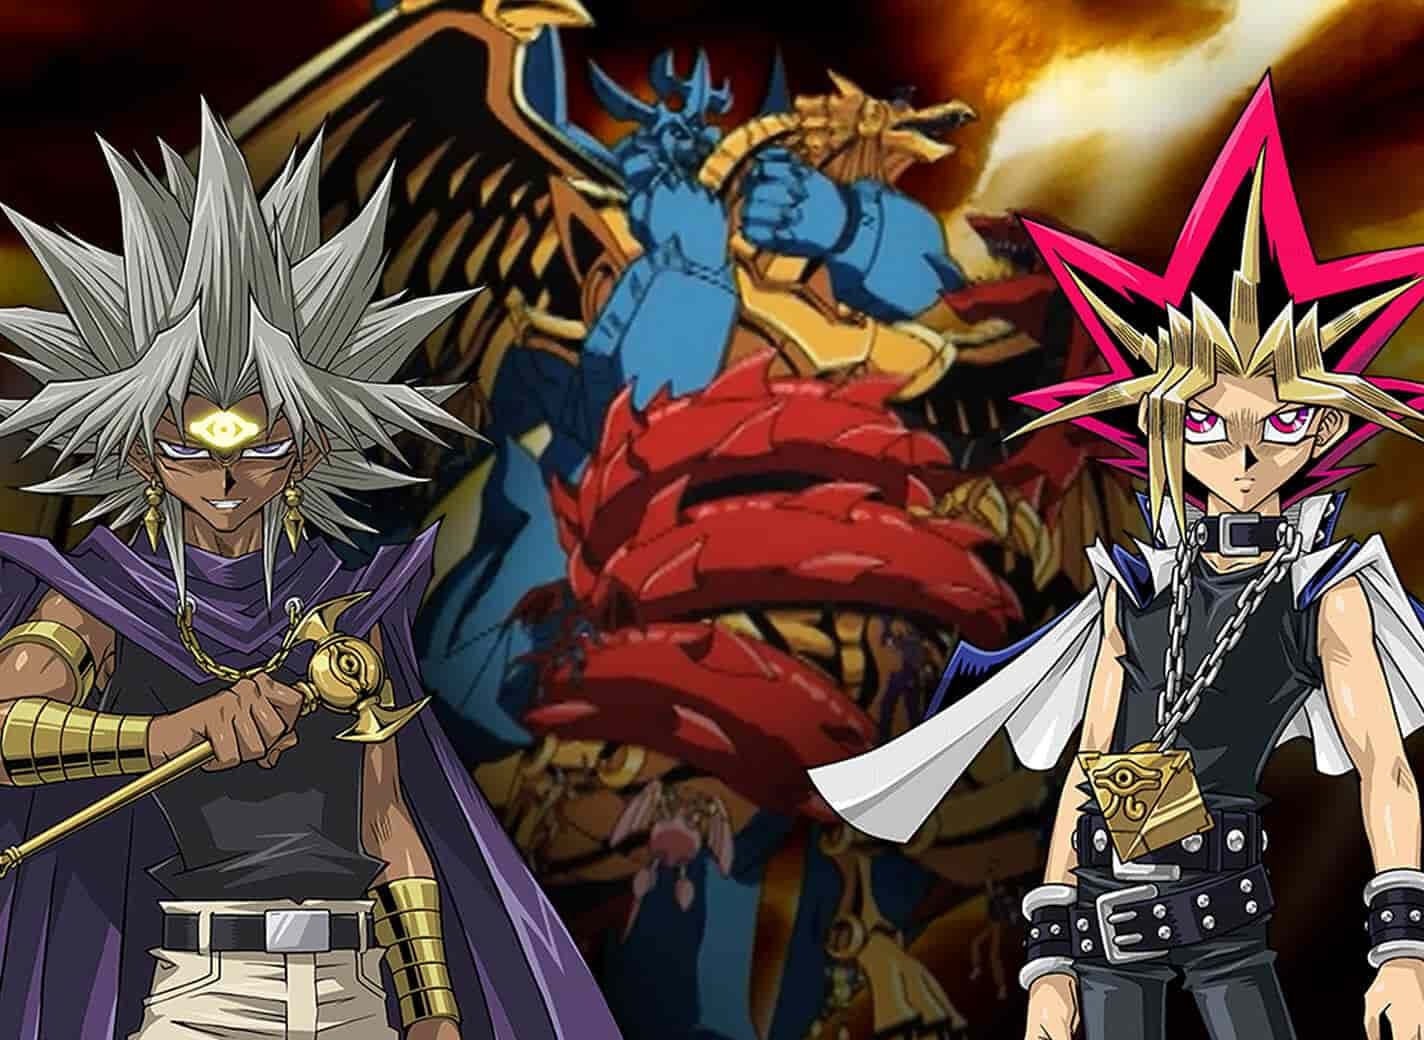 Yu-Gi-Oh! Series synopsis from the official Yu-Gi-Oh! Site.